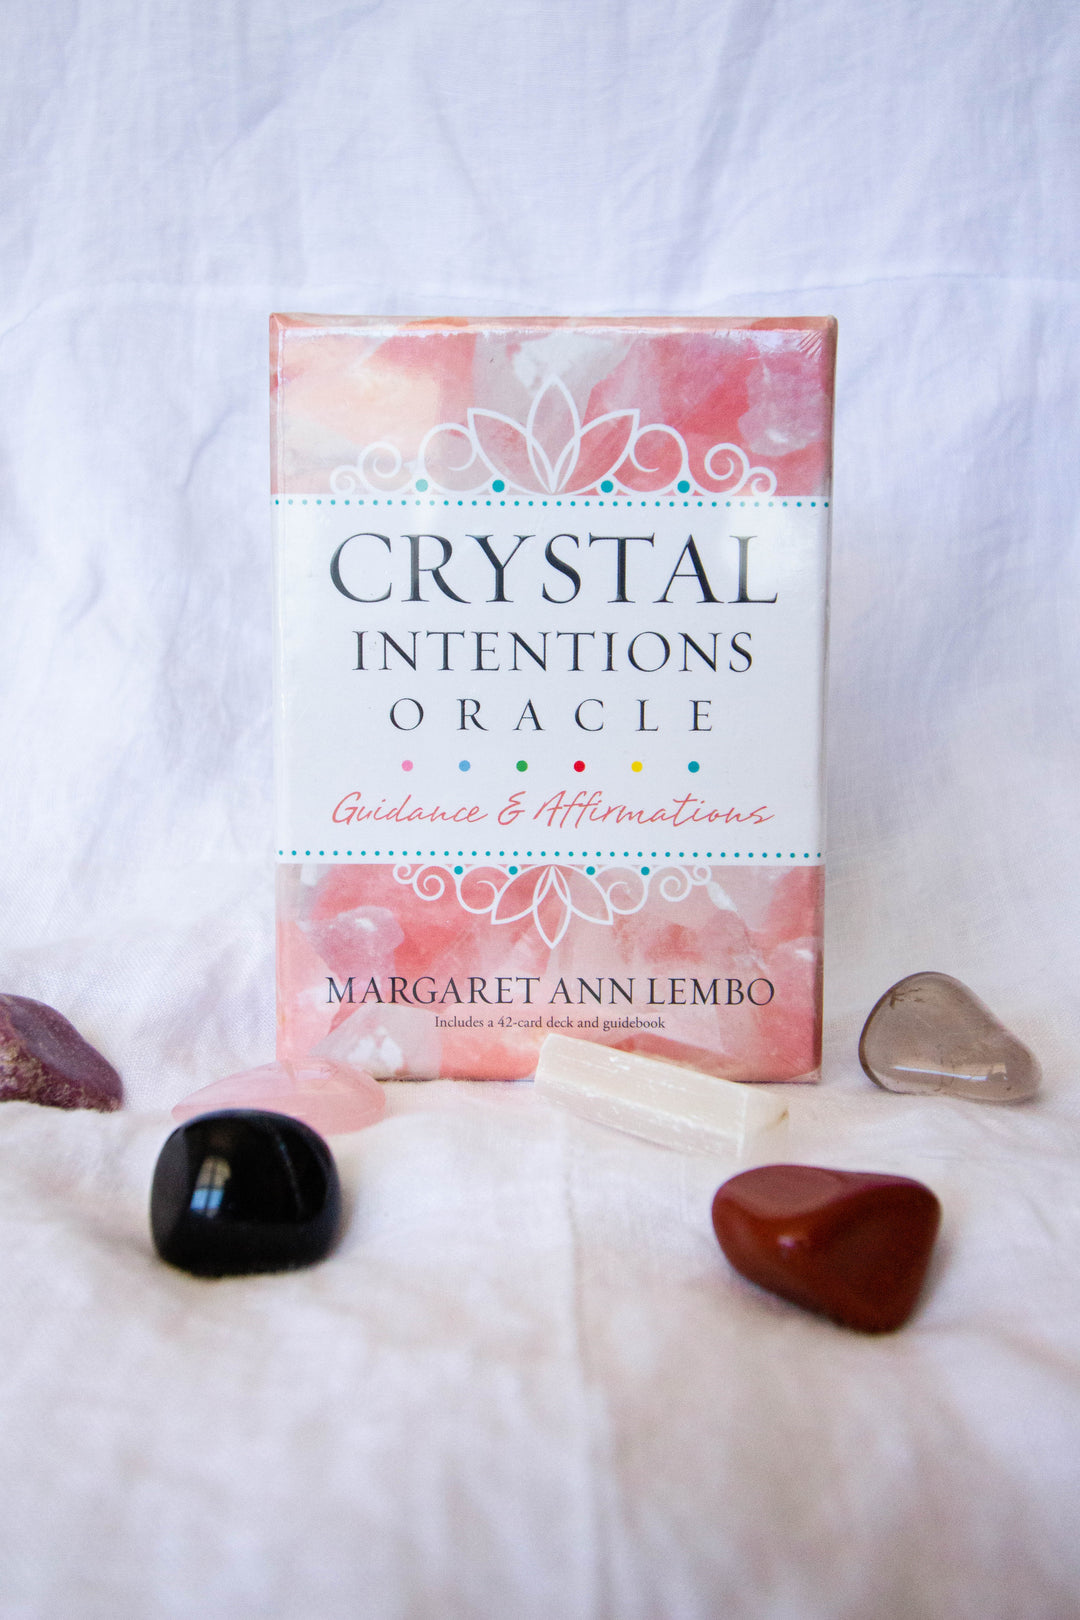 CRYSTAL INTENTIONS ORACLE CARDS